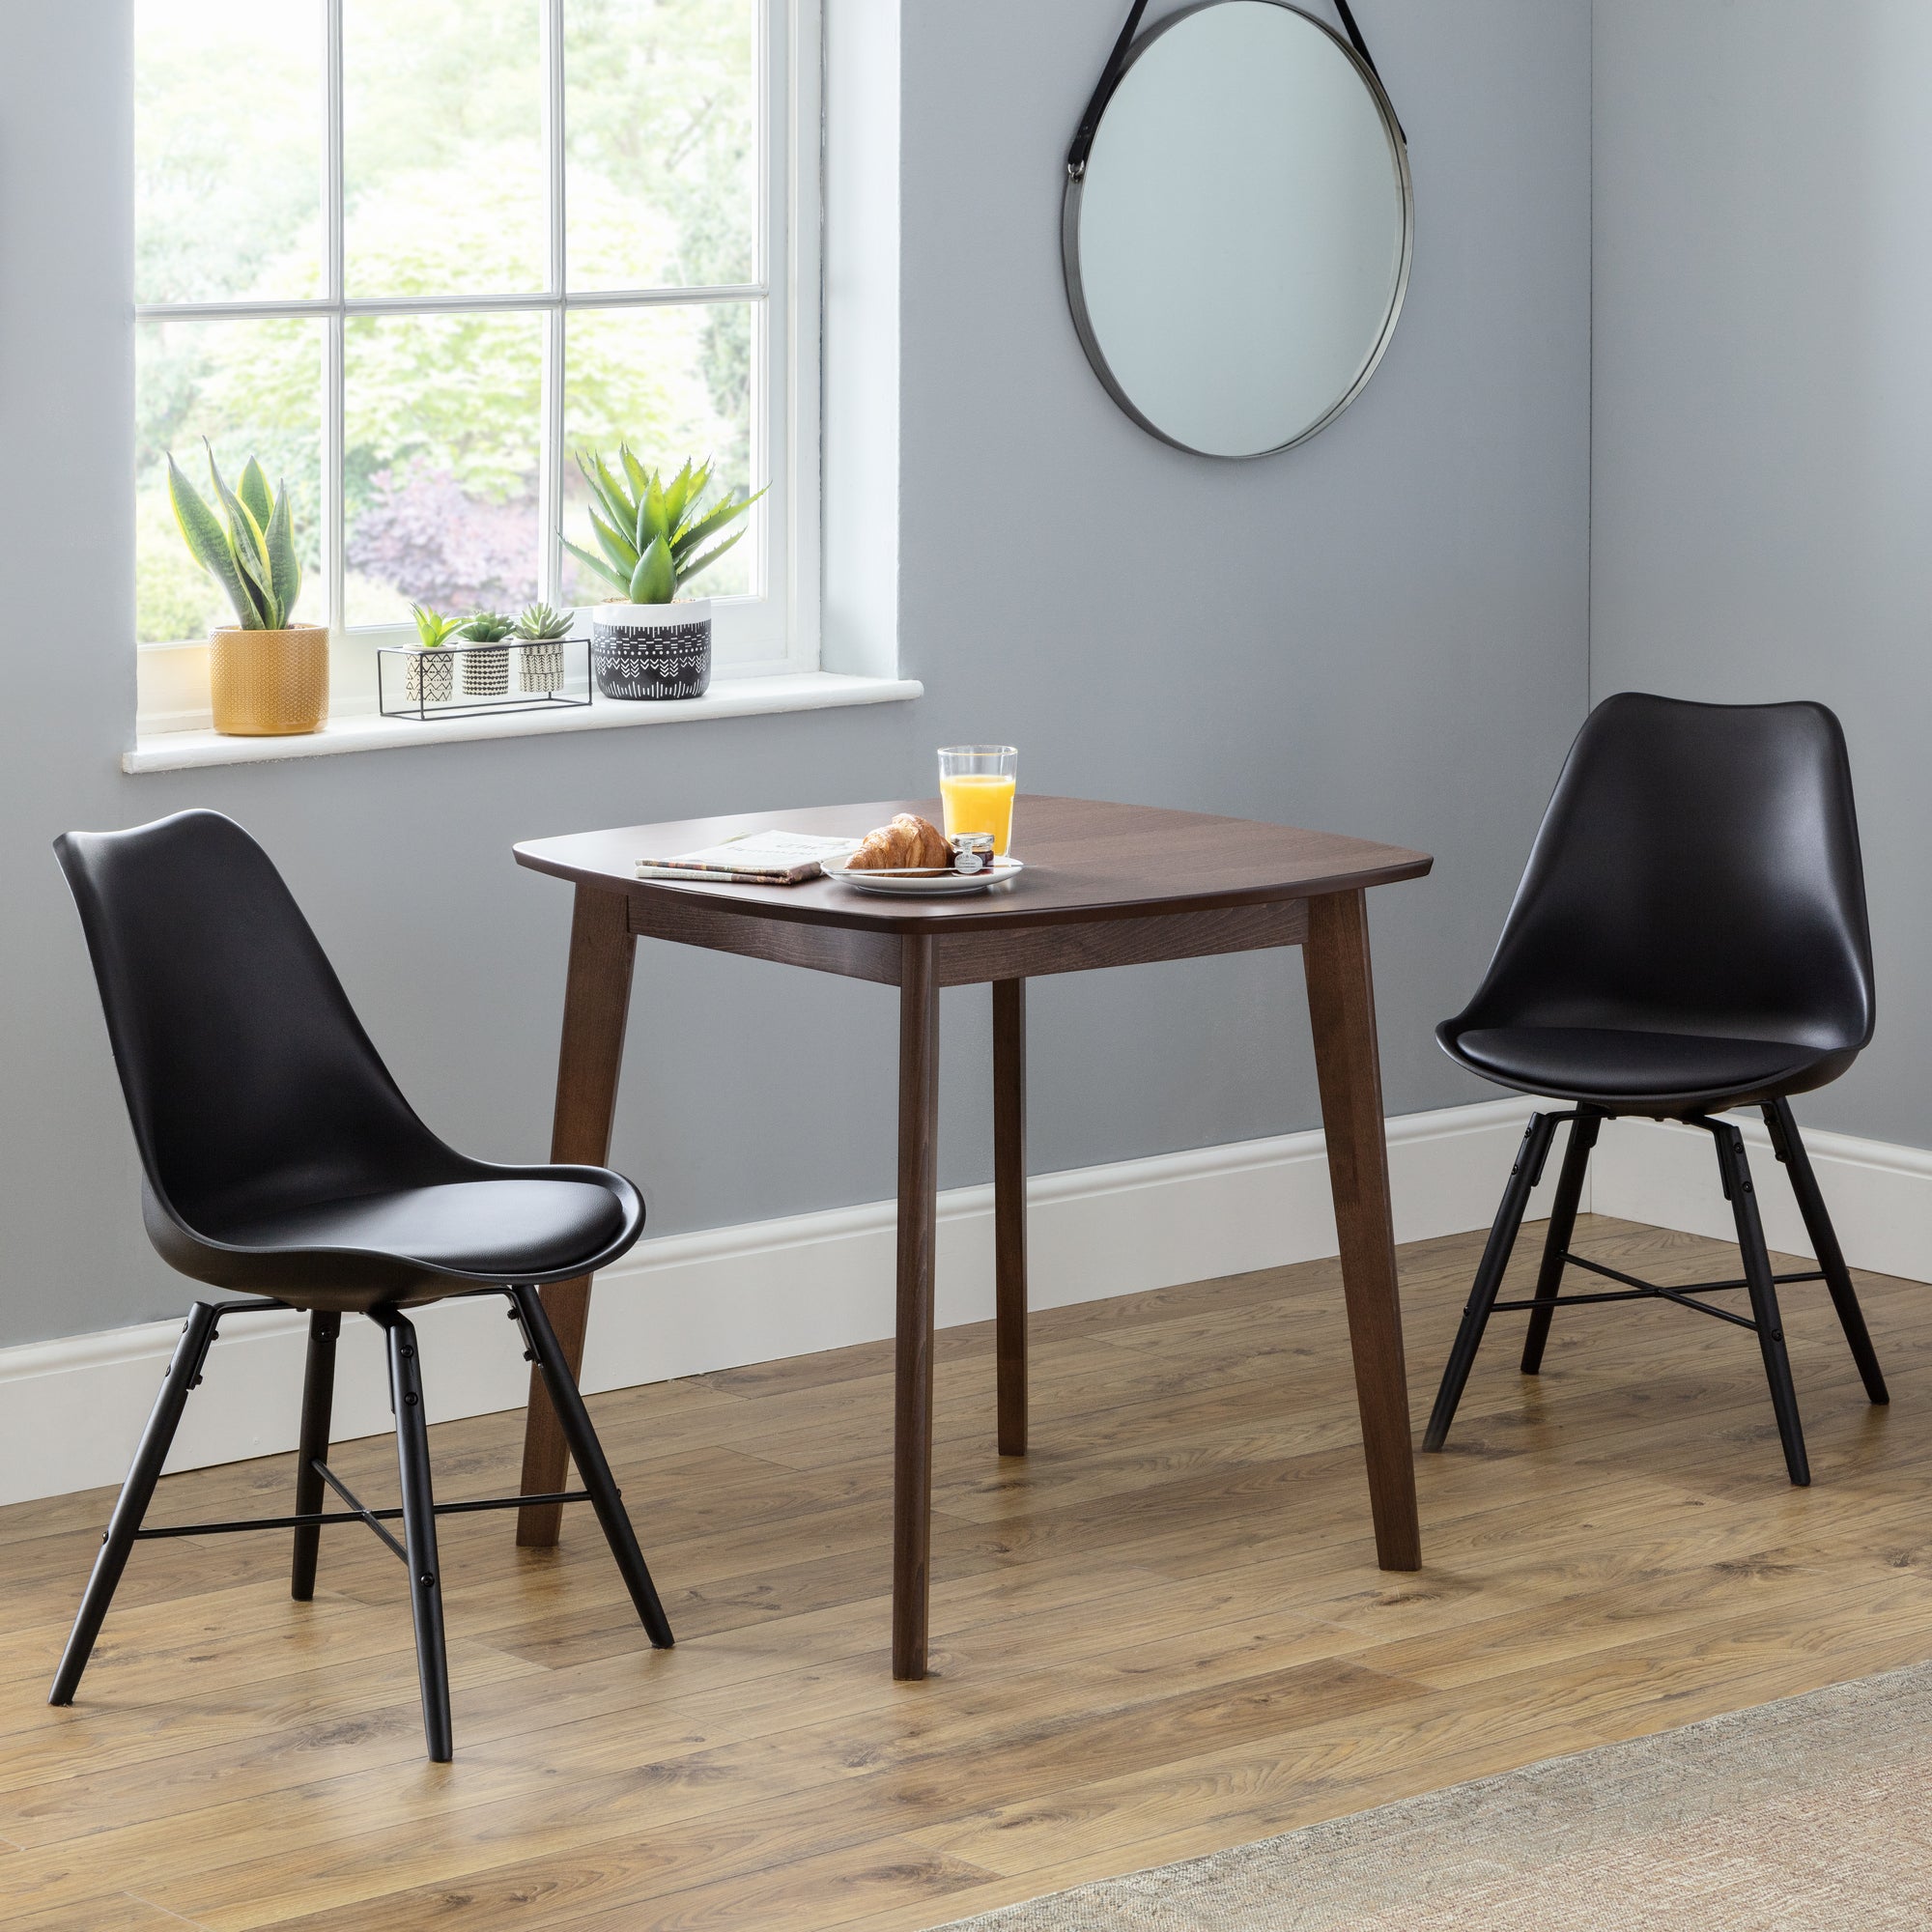 Lennox Square Dining Table With 2 Kari Chairs Beech Wood Brown